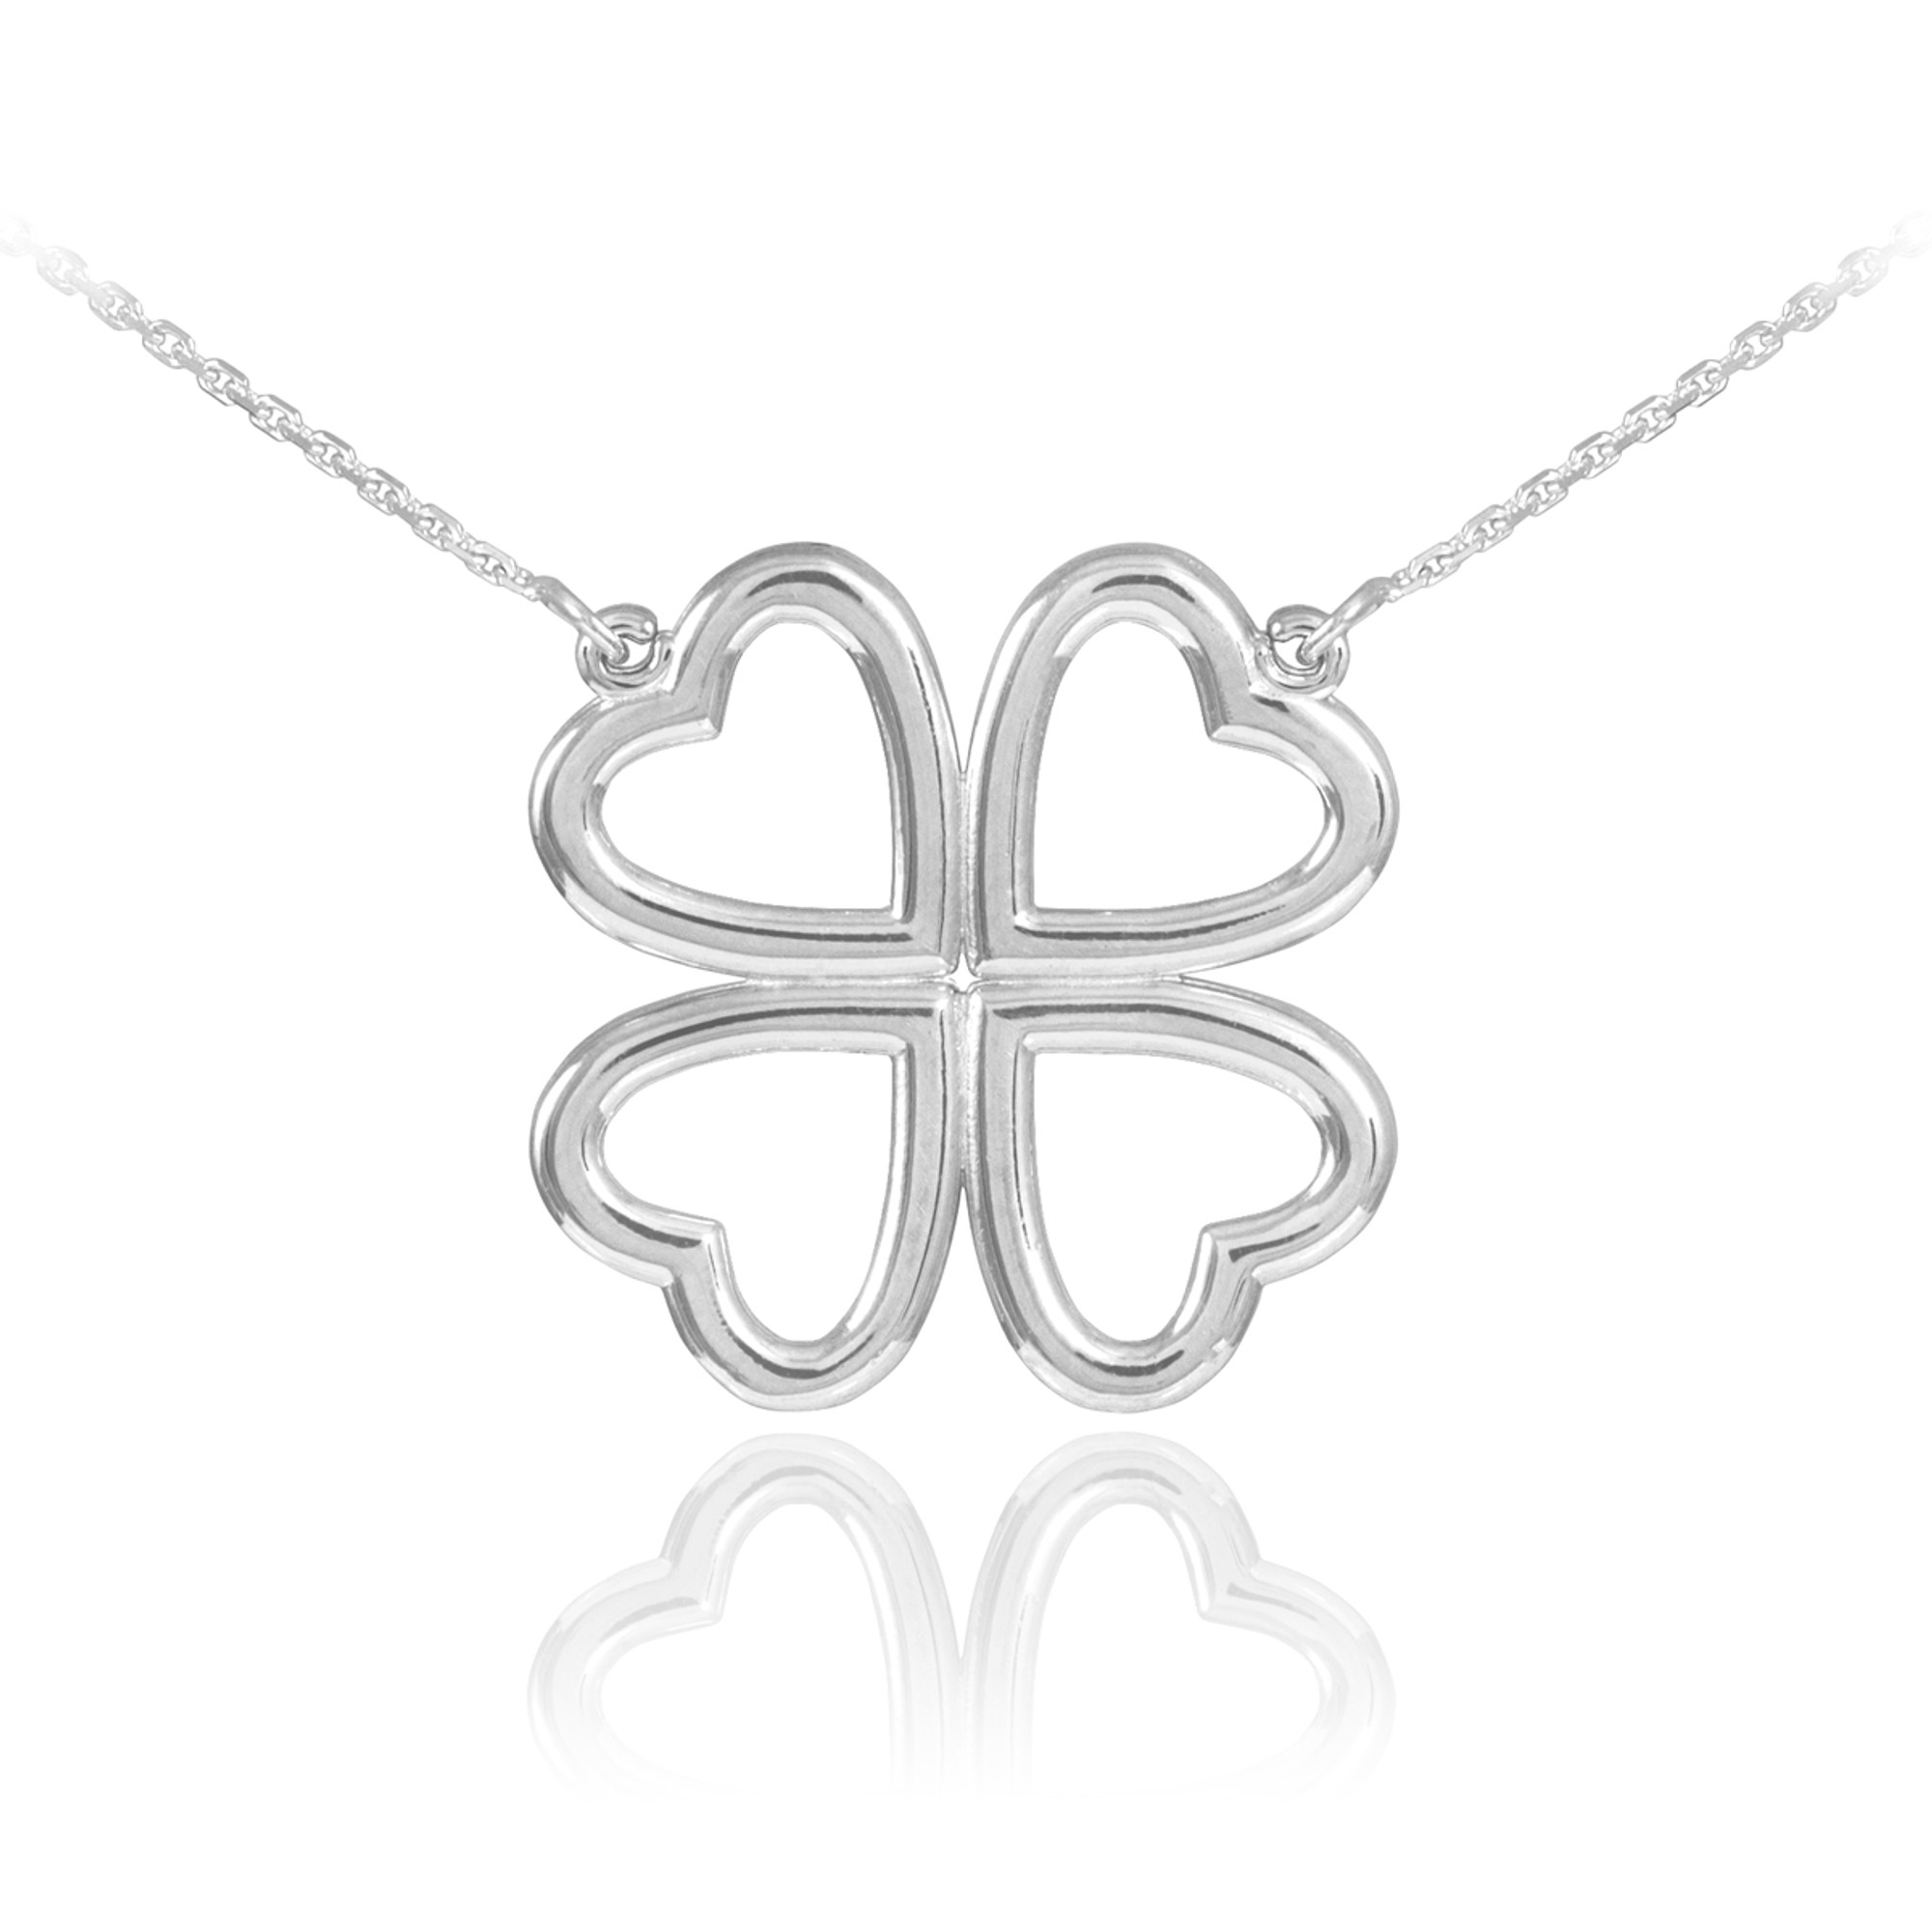 Buy FOUR Leaf CLOVER Necklace Good Luck Jewelry Lucky Clover Pendant Green  Good Luck Token Lucky Charm Necklace Luck of Irish Online in India - Etsy